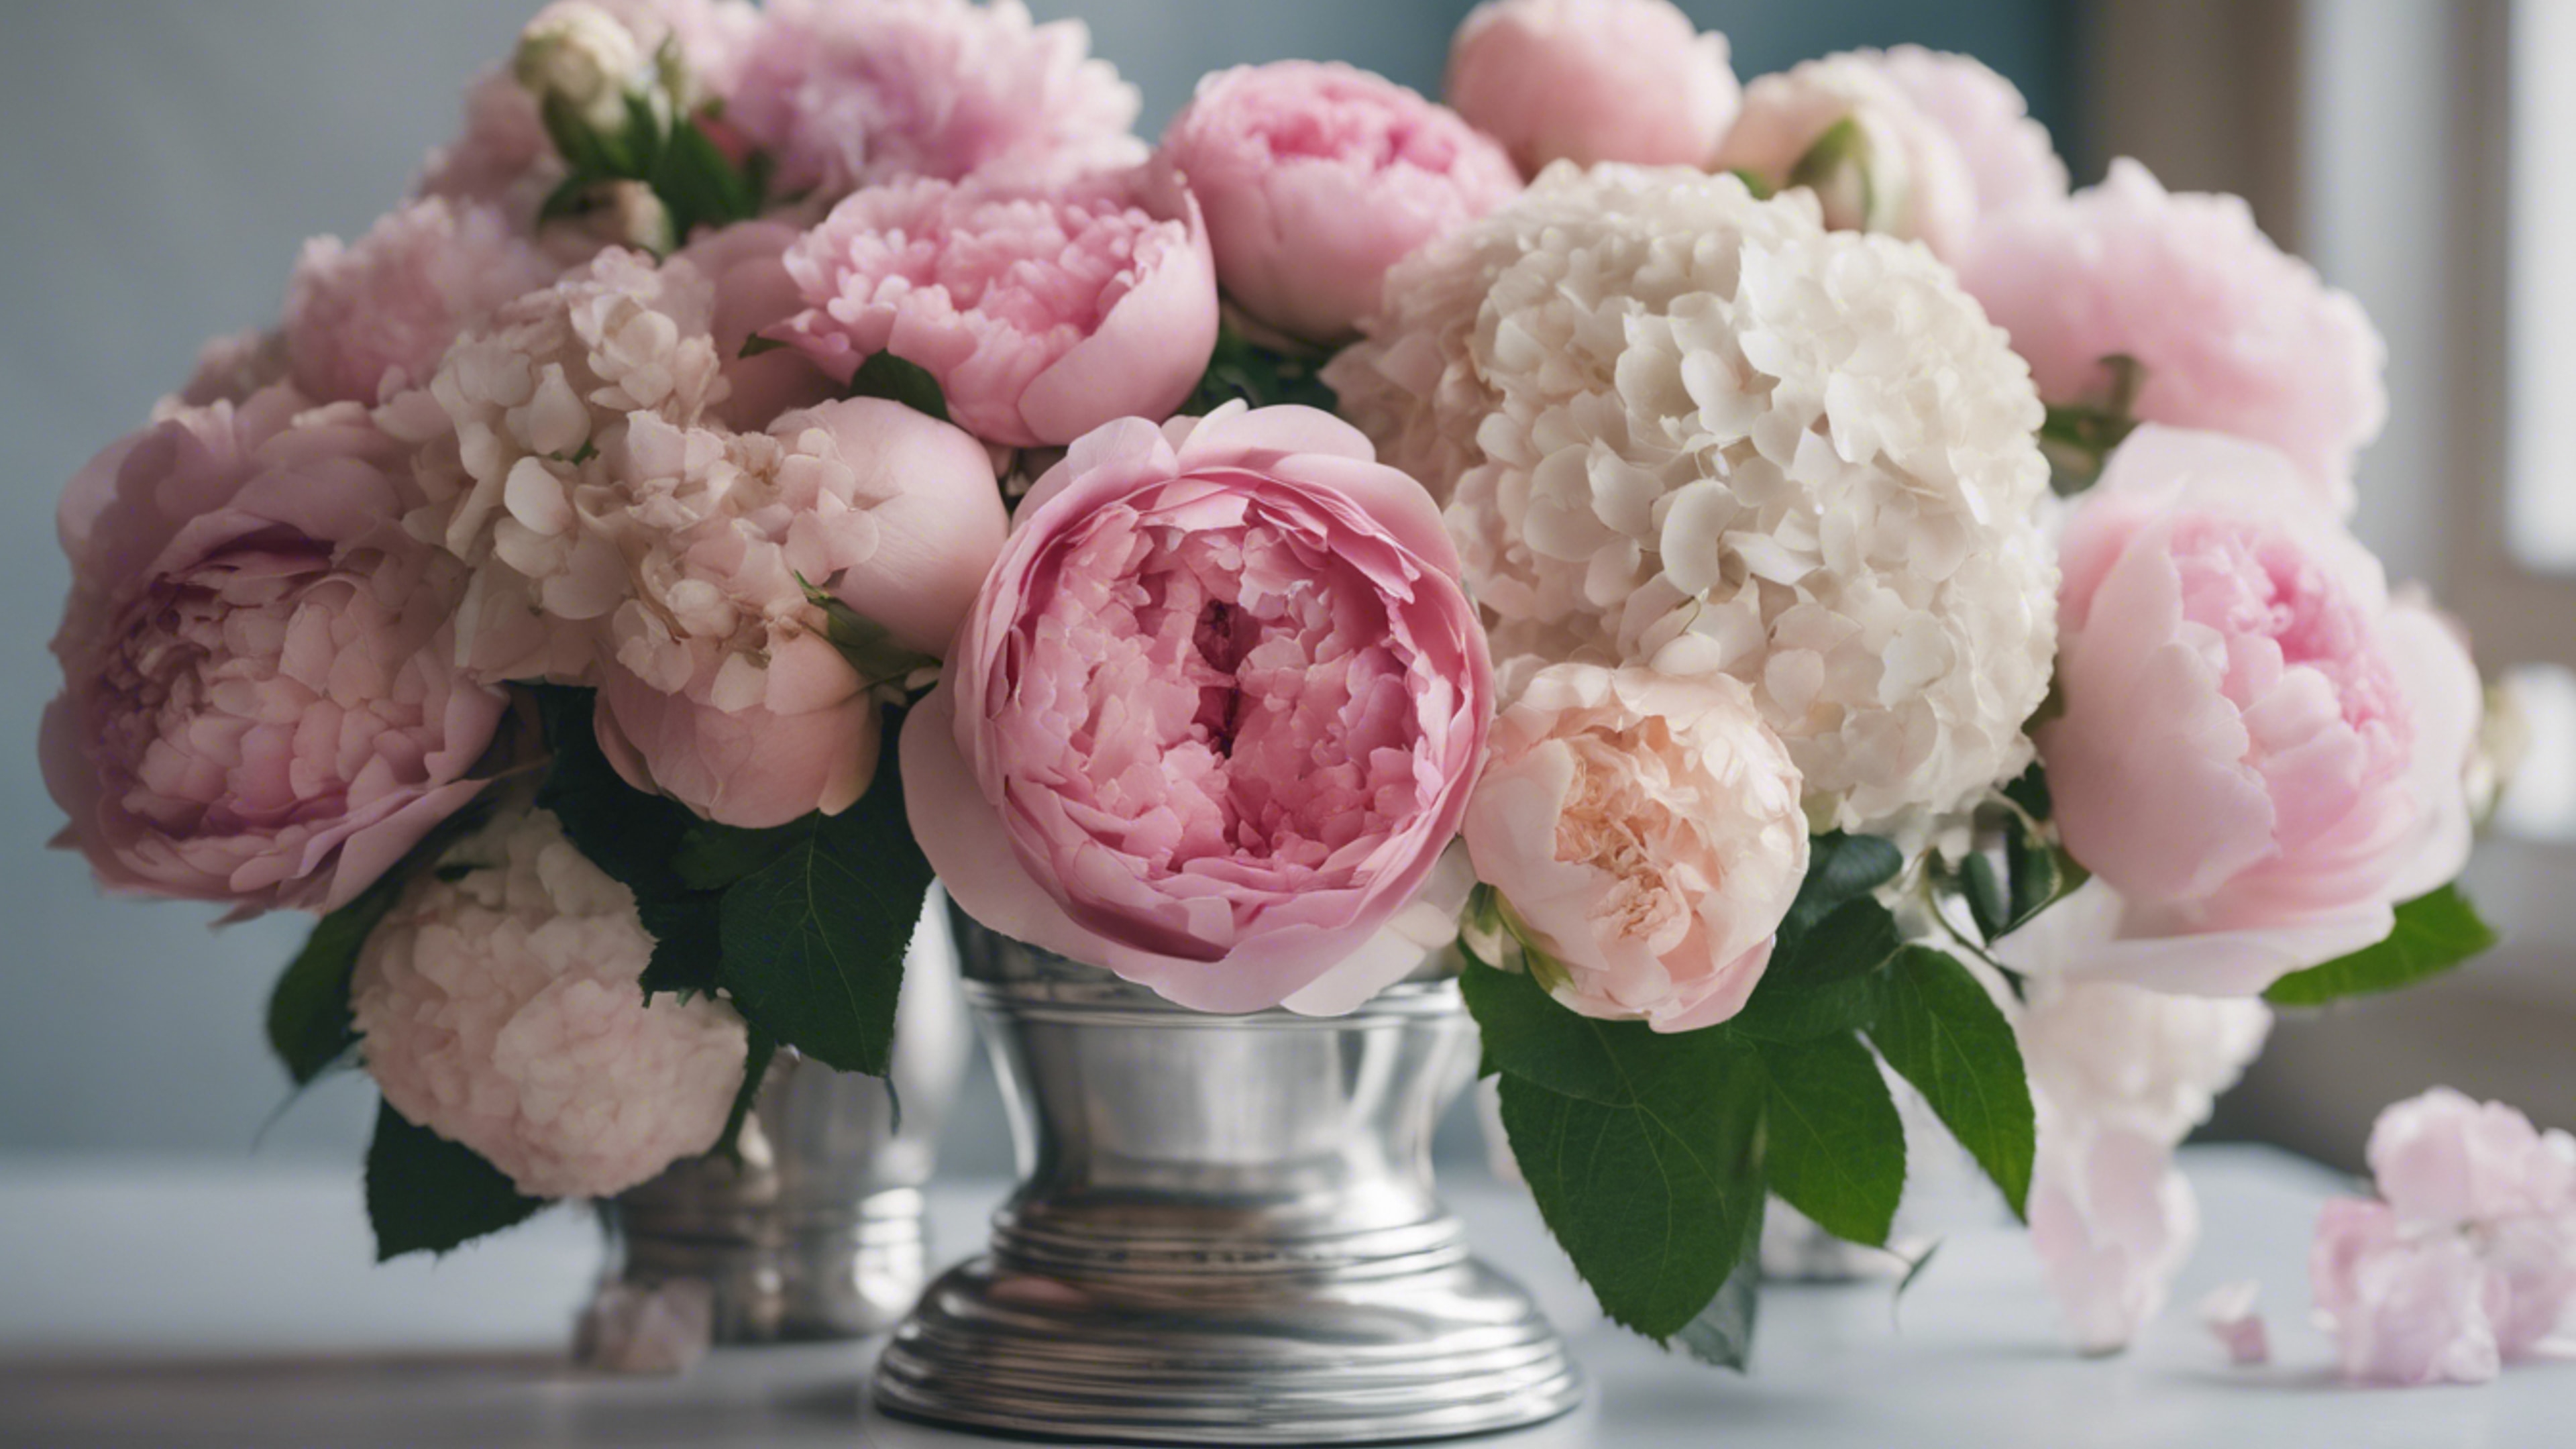 An arrangement of pink roses, peonies, and hydrangeas in a silver vase, embodying preppy elegance.壁紙[810d260cf91945bd97fc]